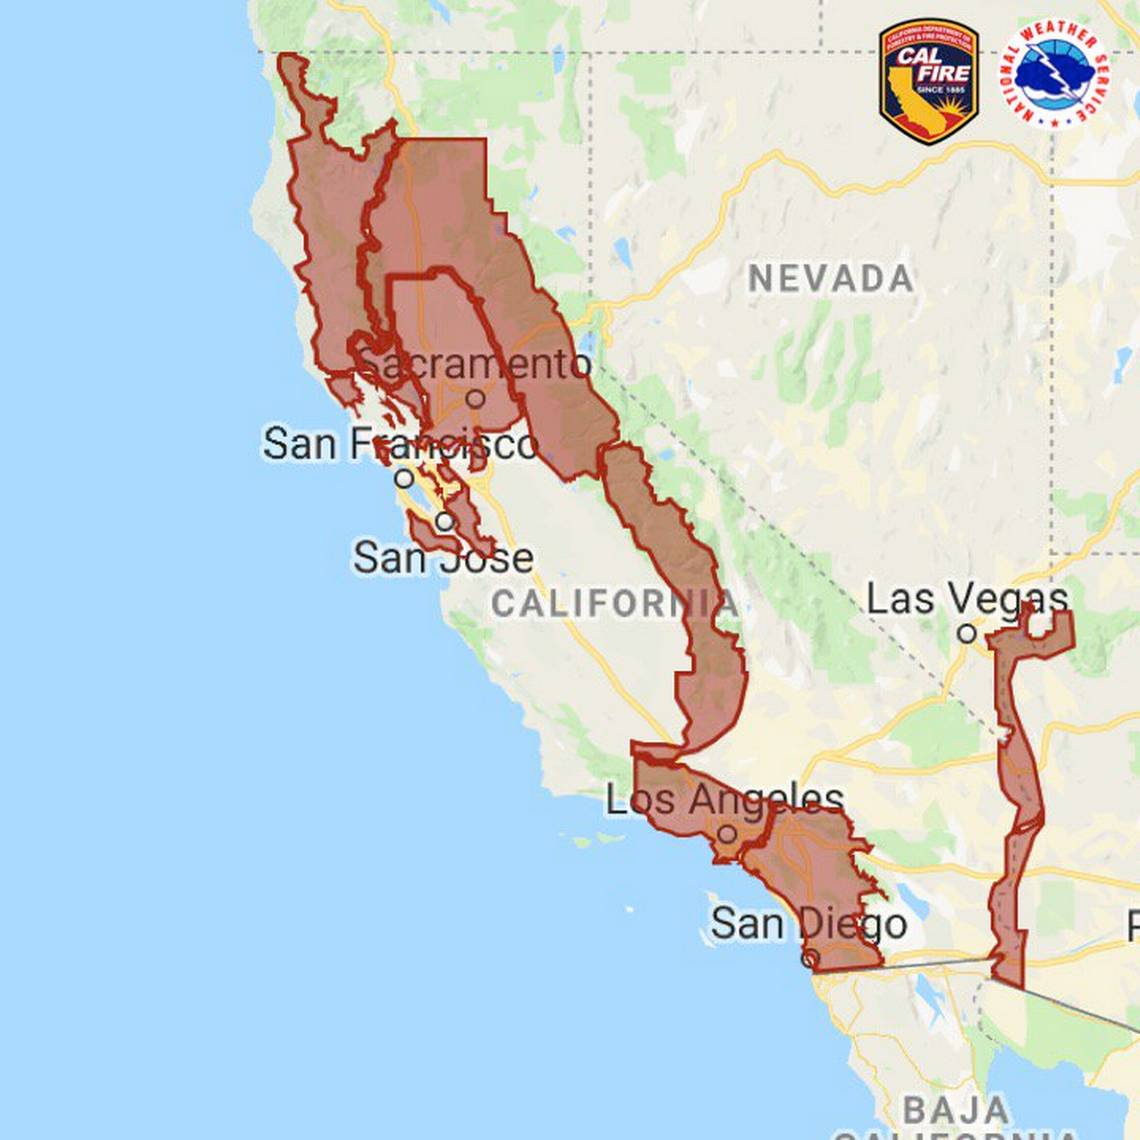 California Wildfire Updates | Red Flag Wind Warning Extended | The - San Diego California Fire Map